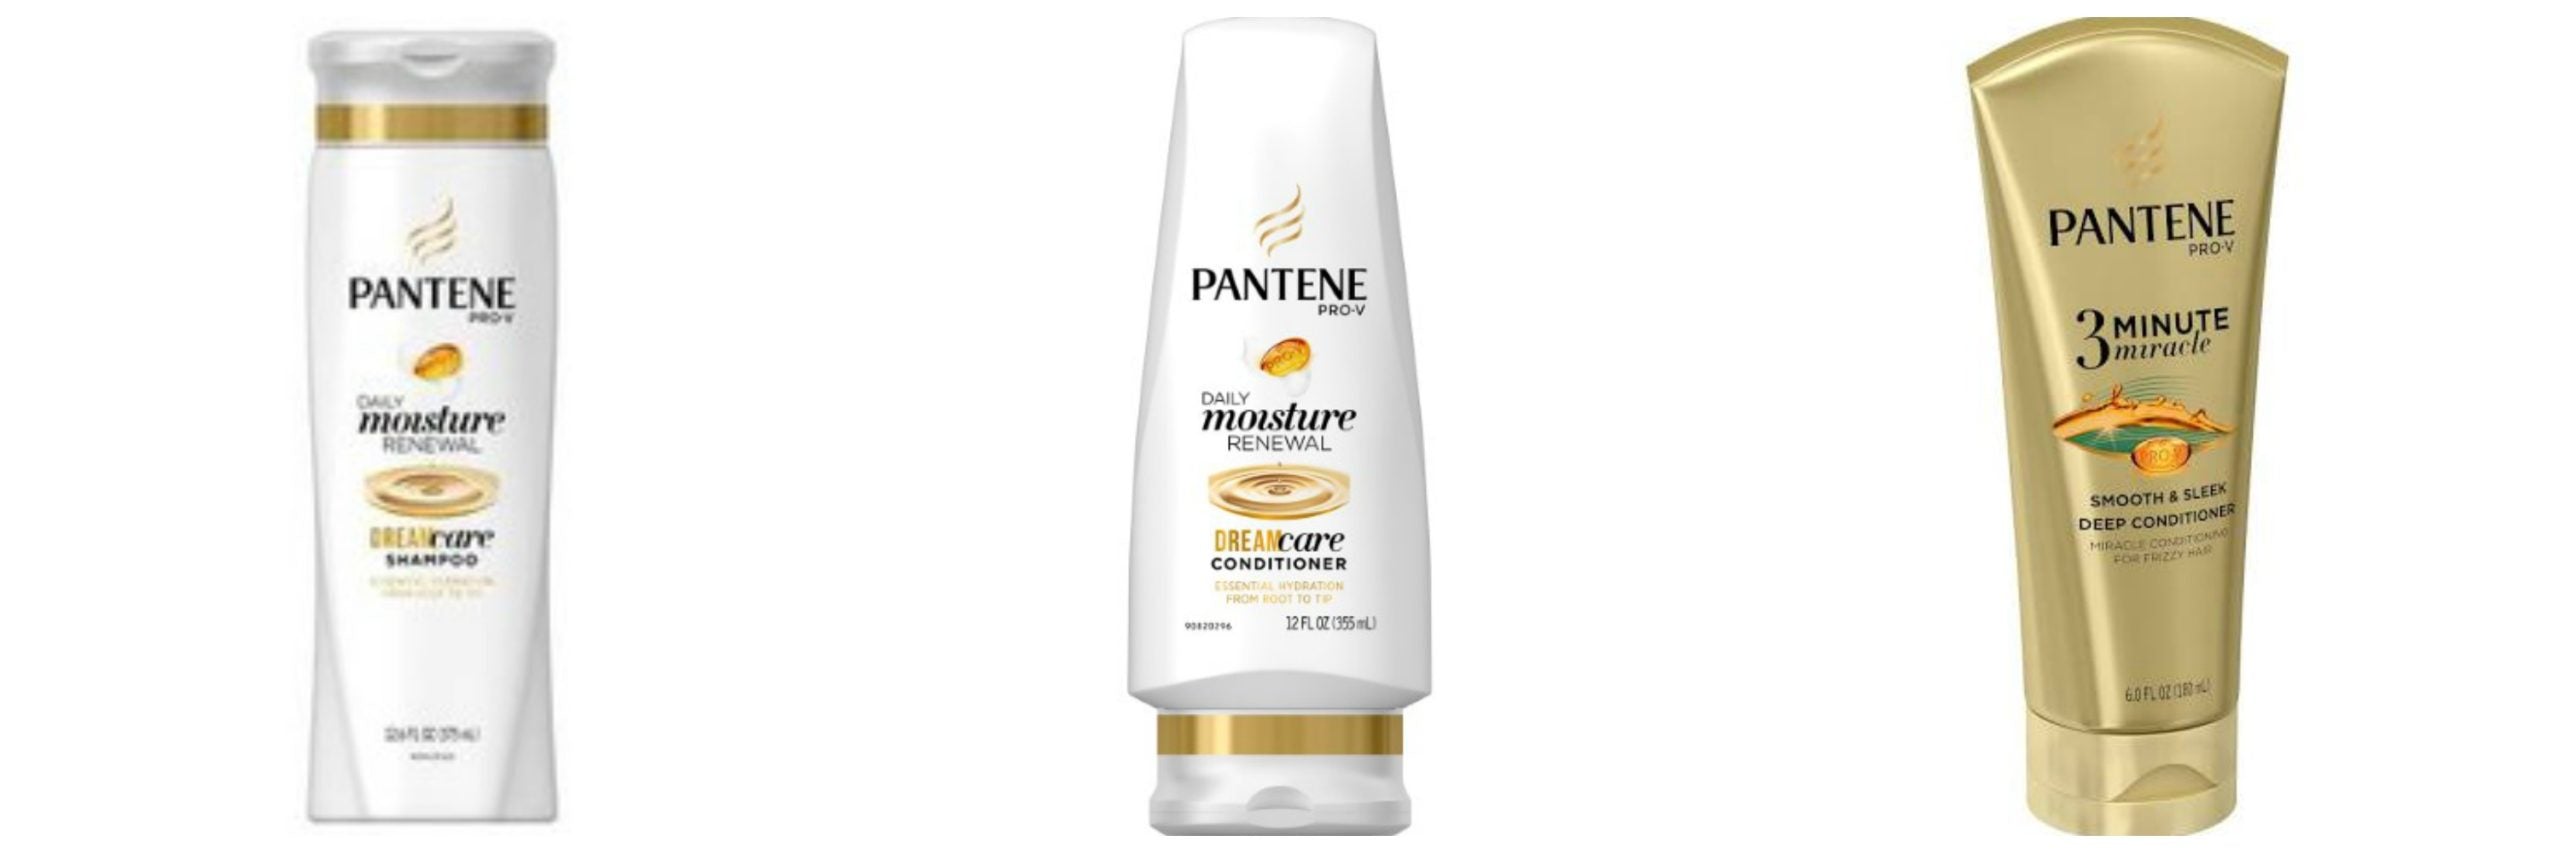 Review, Photos, Ingredients, Hairstyle, Haircare Trend 2017, 2018: Pantene Pro-V DreamCare Shampoo and Conditioner, Pantene Pro-V 3 Minute Miracle Smooth & Sleek Deep Conditioner